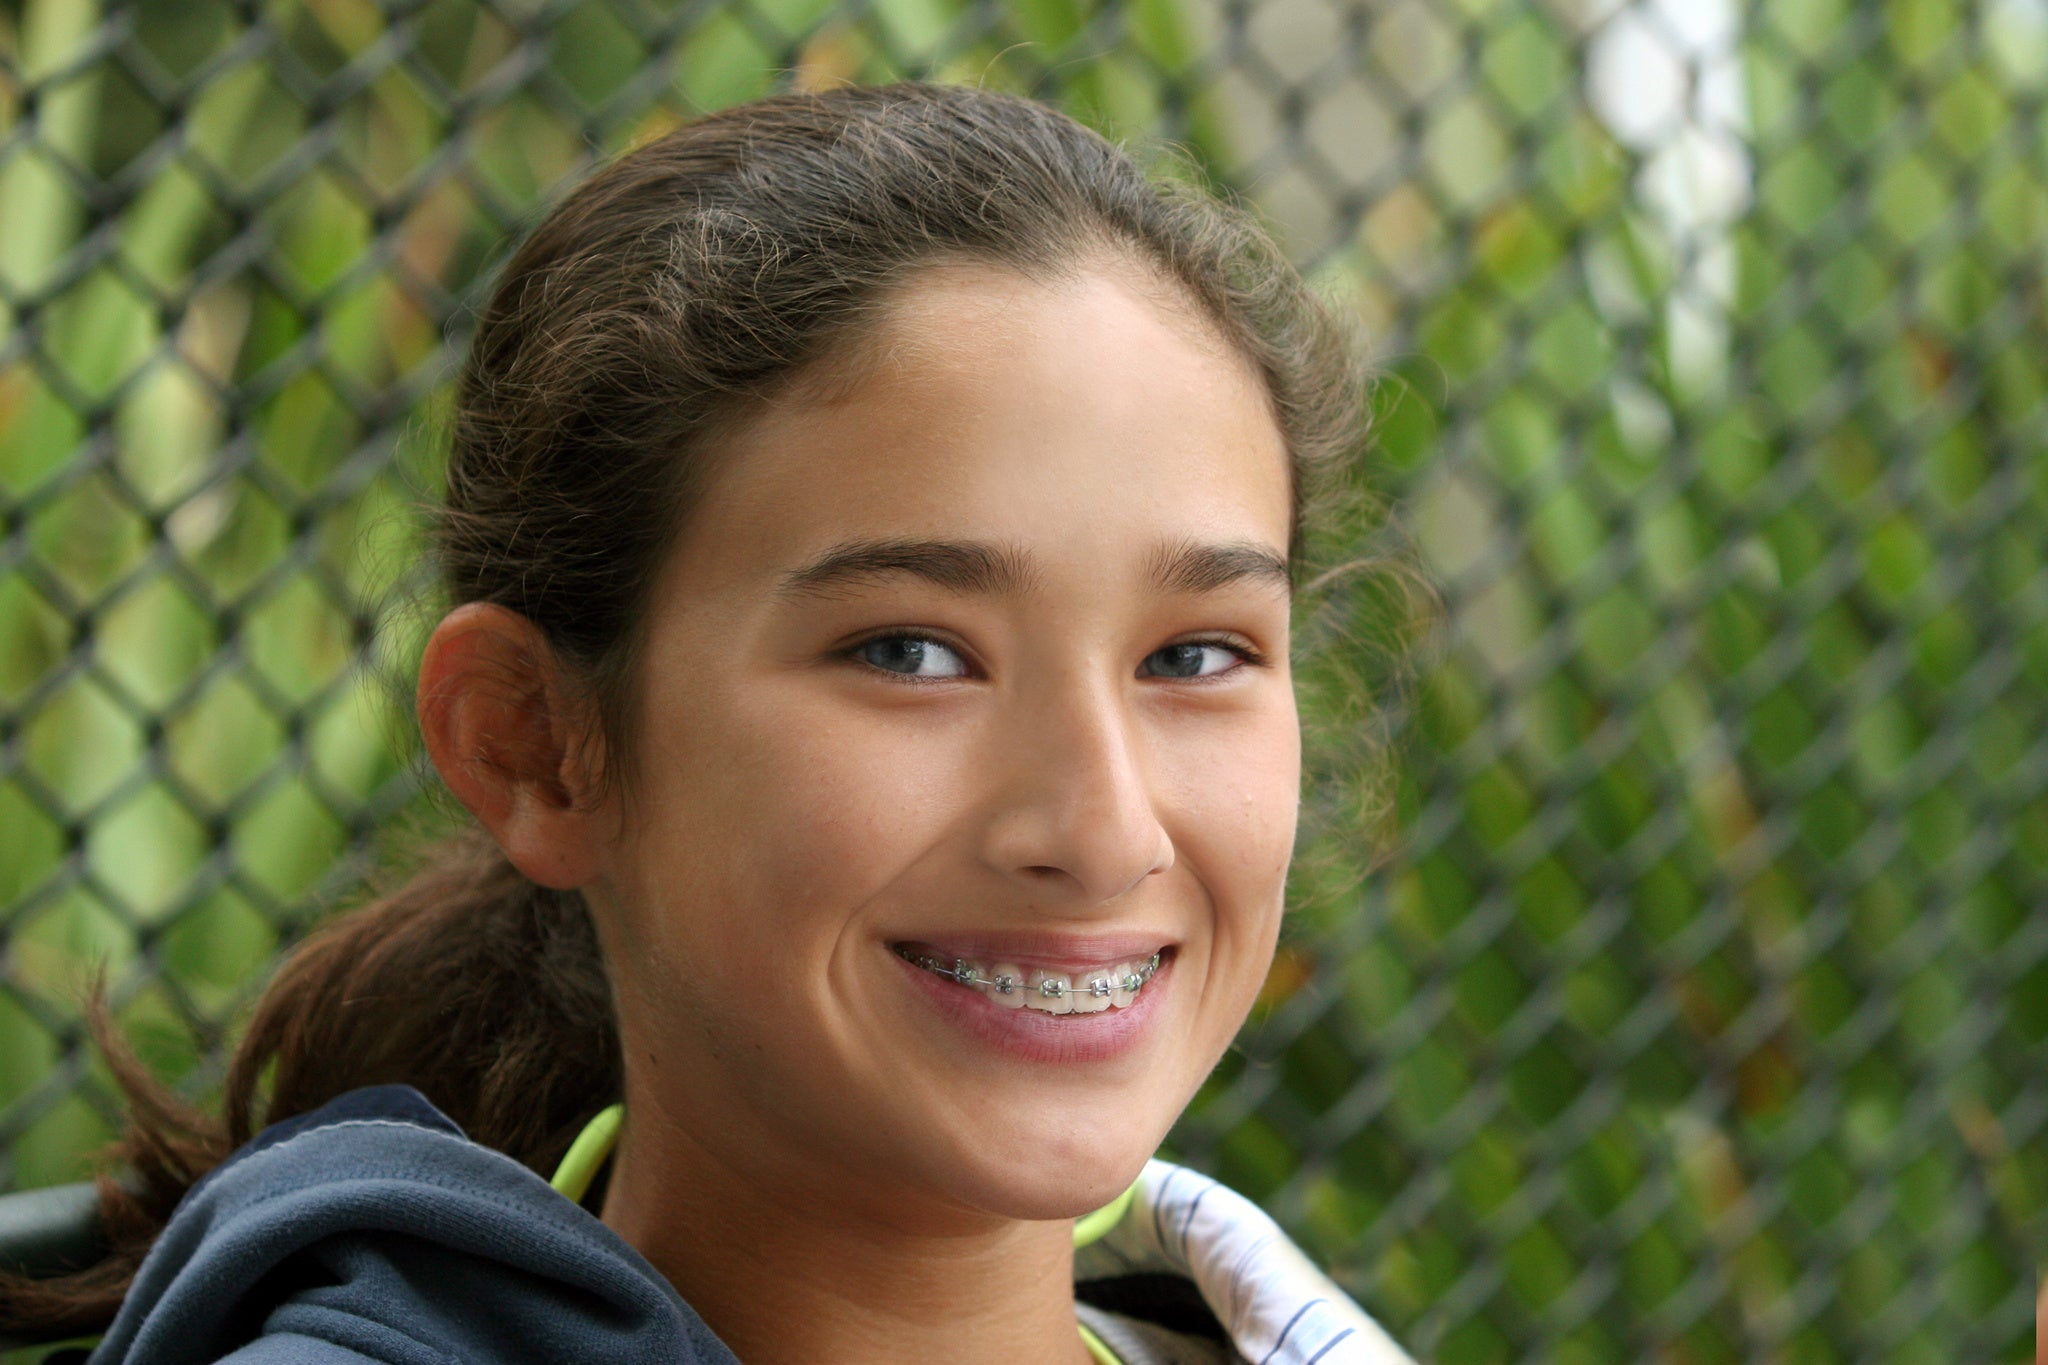 Girl-with-braces-and-brown-hair-smiling